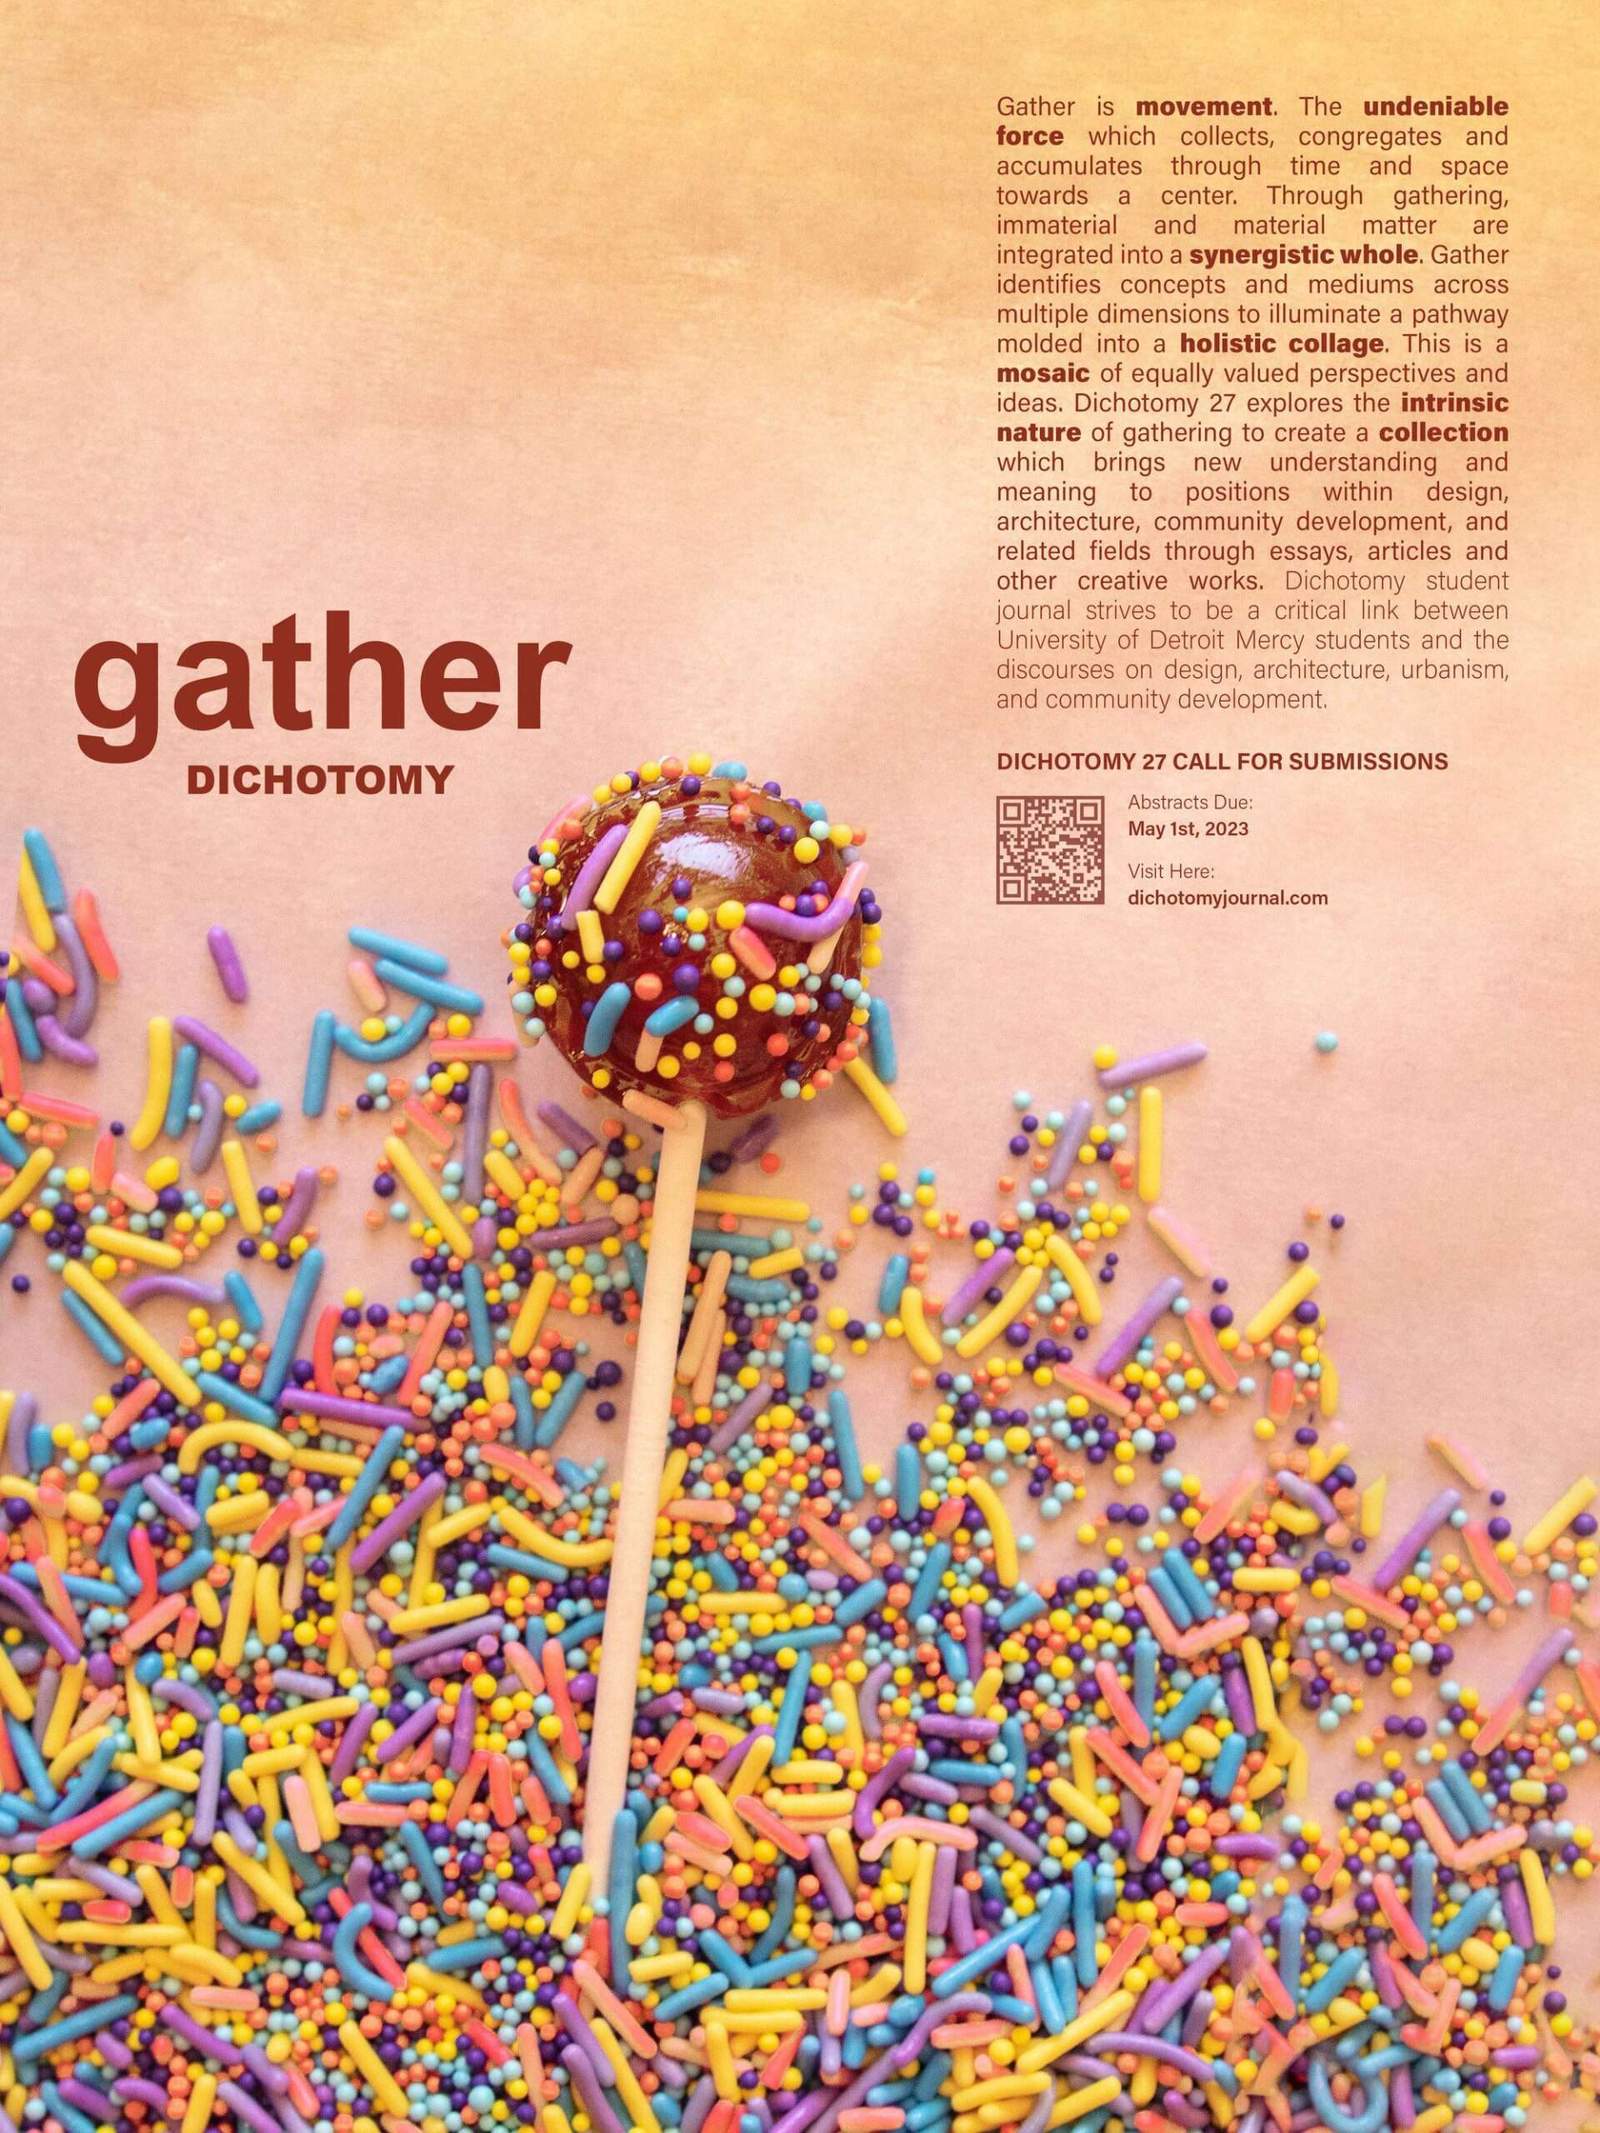 Call for Submission: Dichotomy 27 GATHER